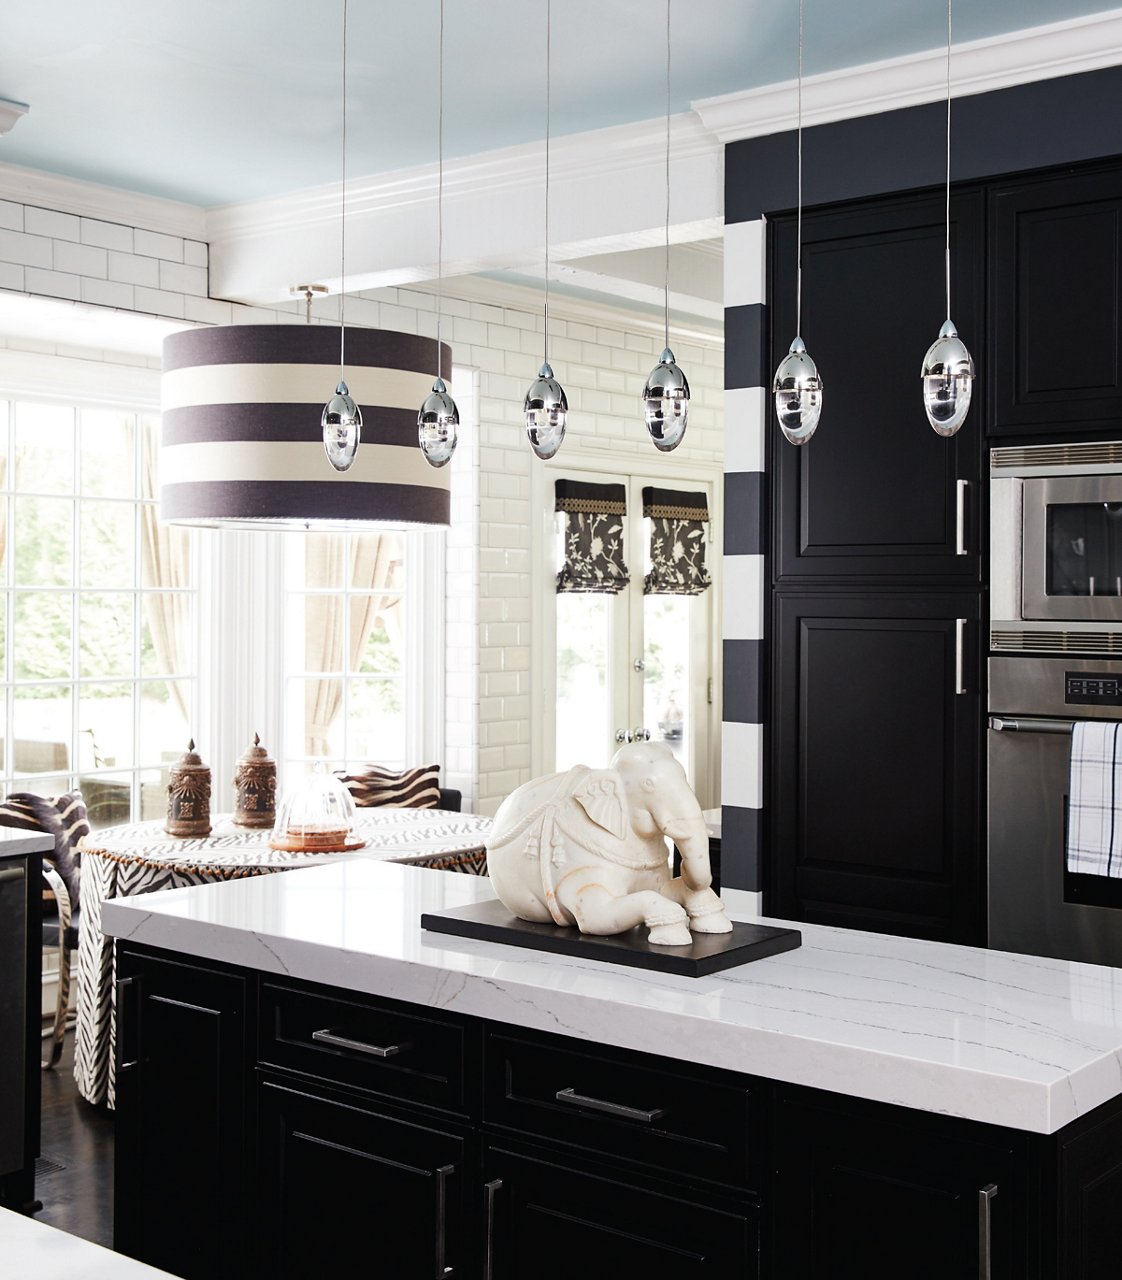 a bold black and white kitchen with black cabinets, white quartz countertops on the island, 6 pendant lights, one striped chandelier above the dining table